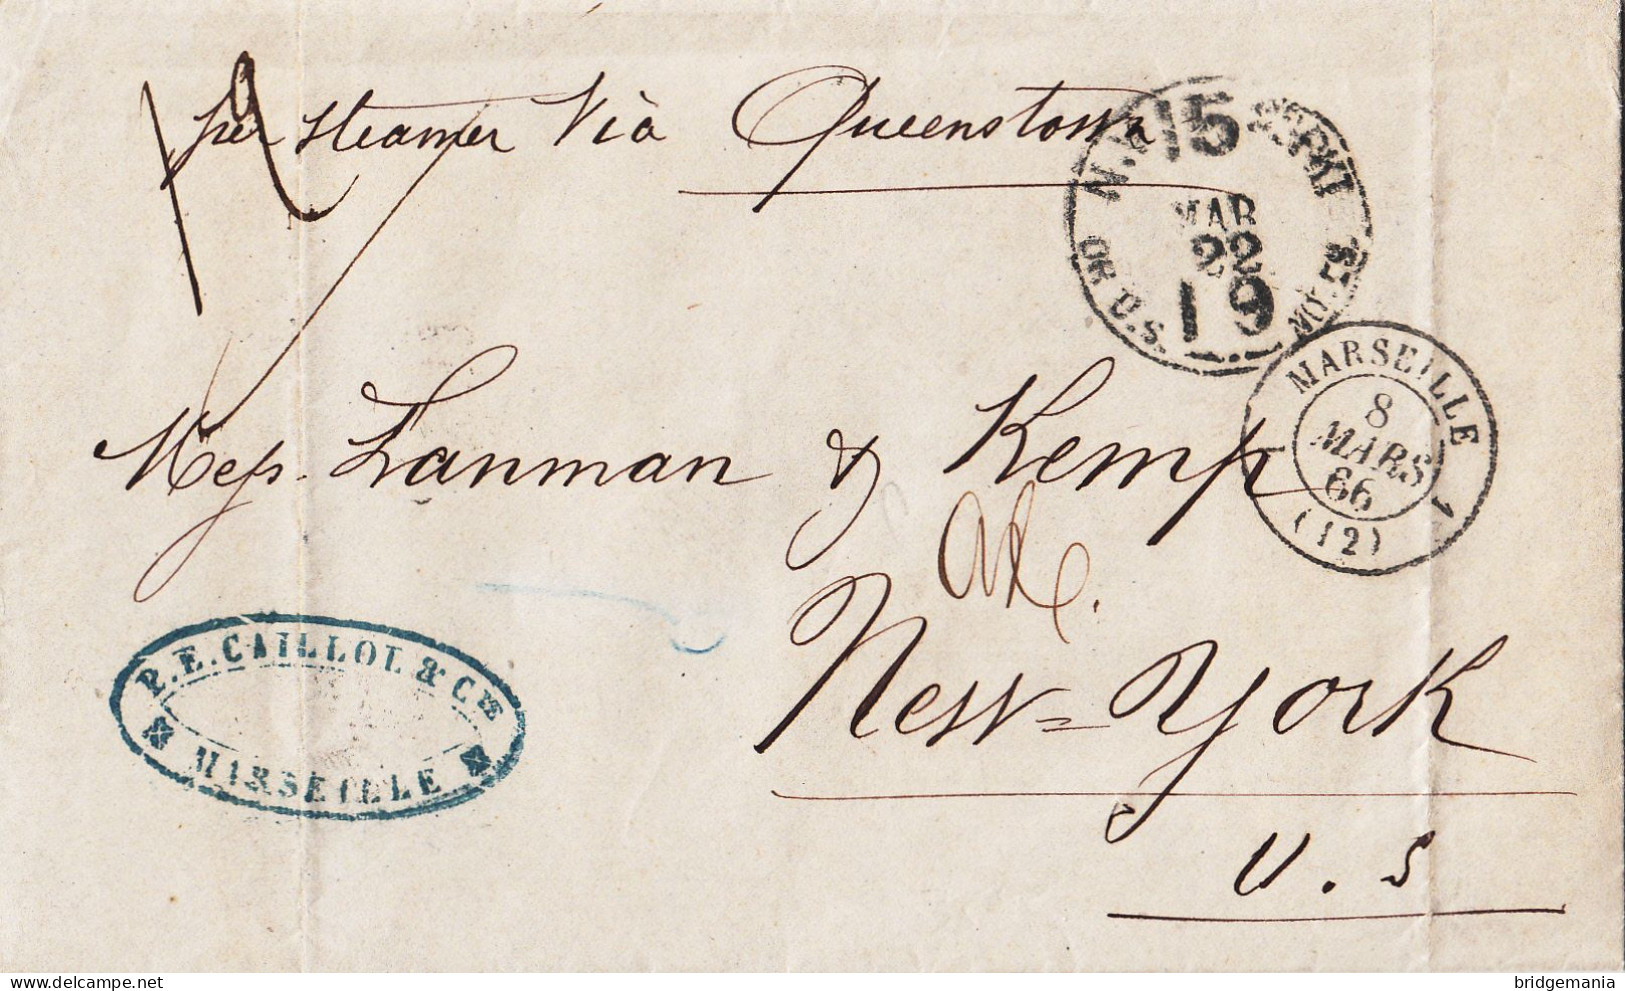 MTM146 - 1866 TRANSATLANTIC LETTER FRANCE TO USA Steamer AUSTRALASIA CUNARD - UNPAID - DEPRECIATED CURRENCY - Marcofilie